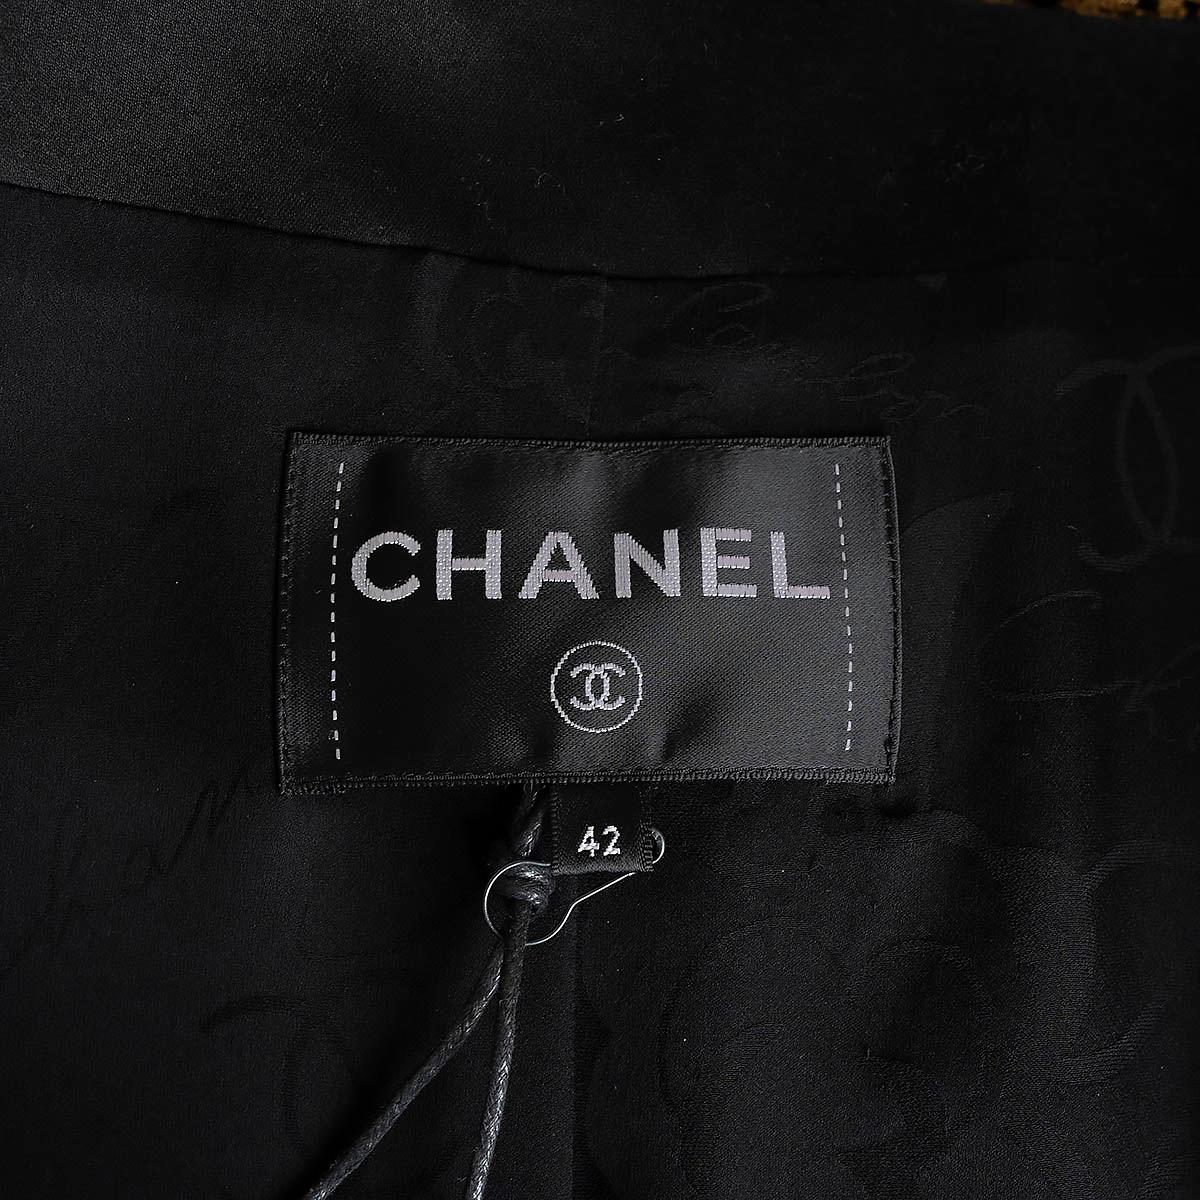 CHANEL black rayon 2017 17A COSMOPOLITE EMBROIDERED TWEED Jacket 42 L For Sale 5